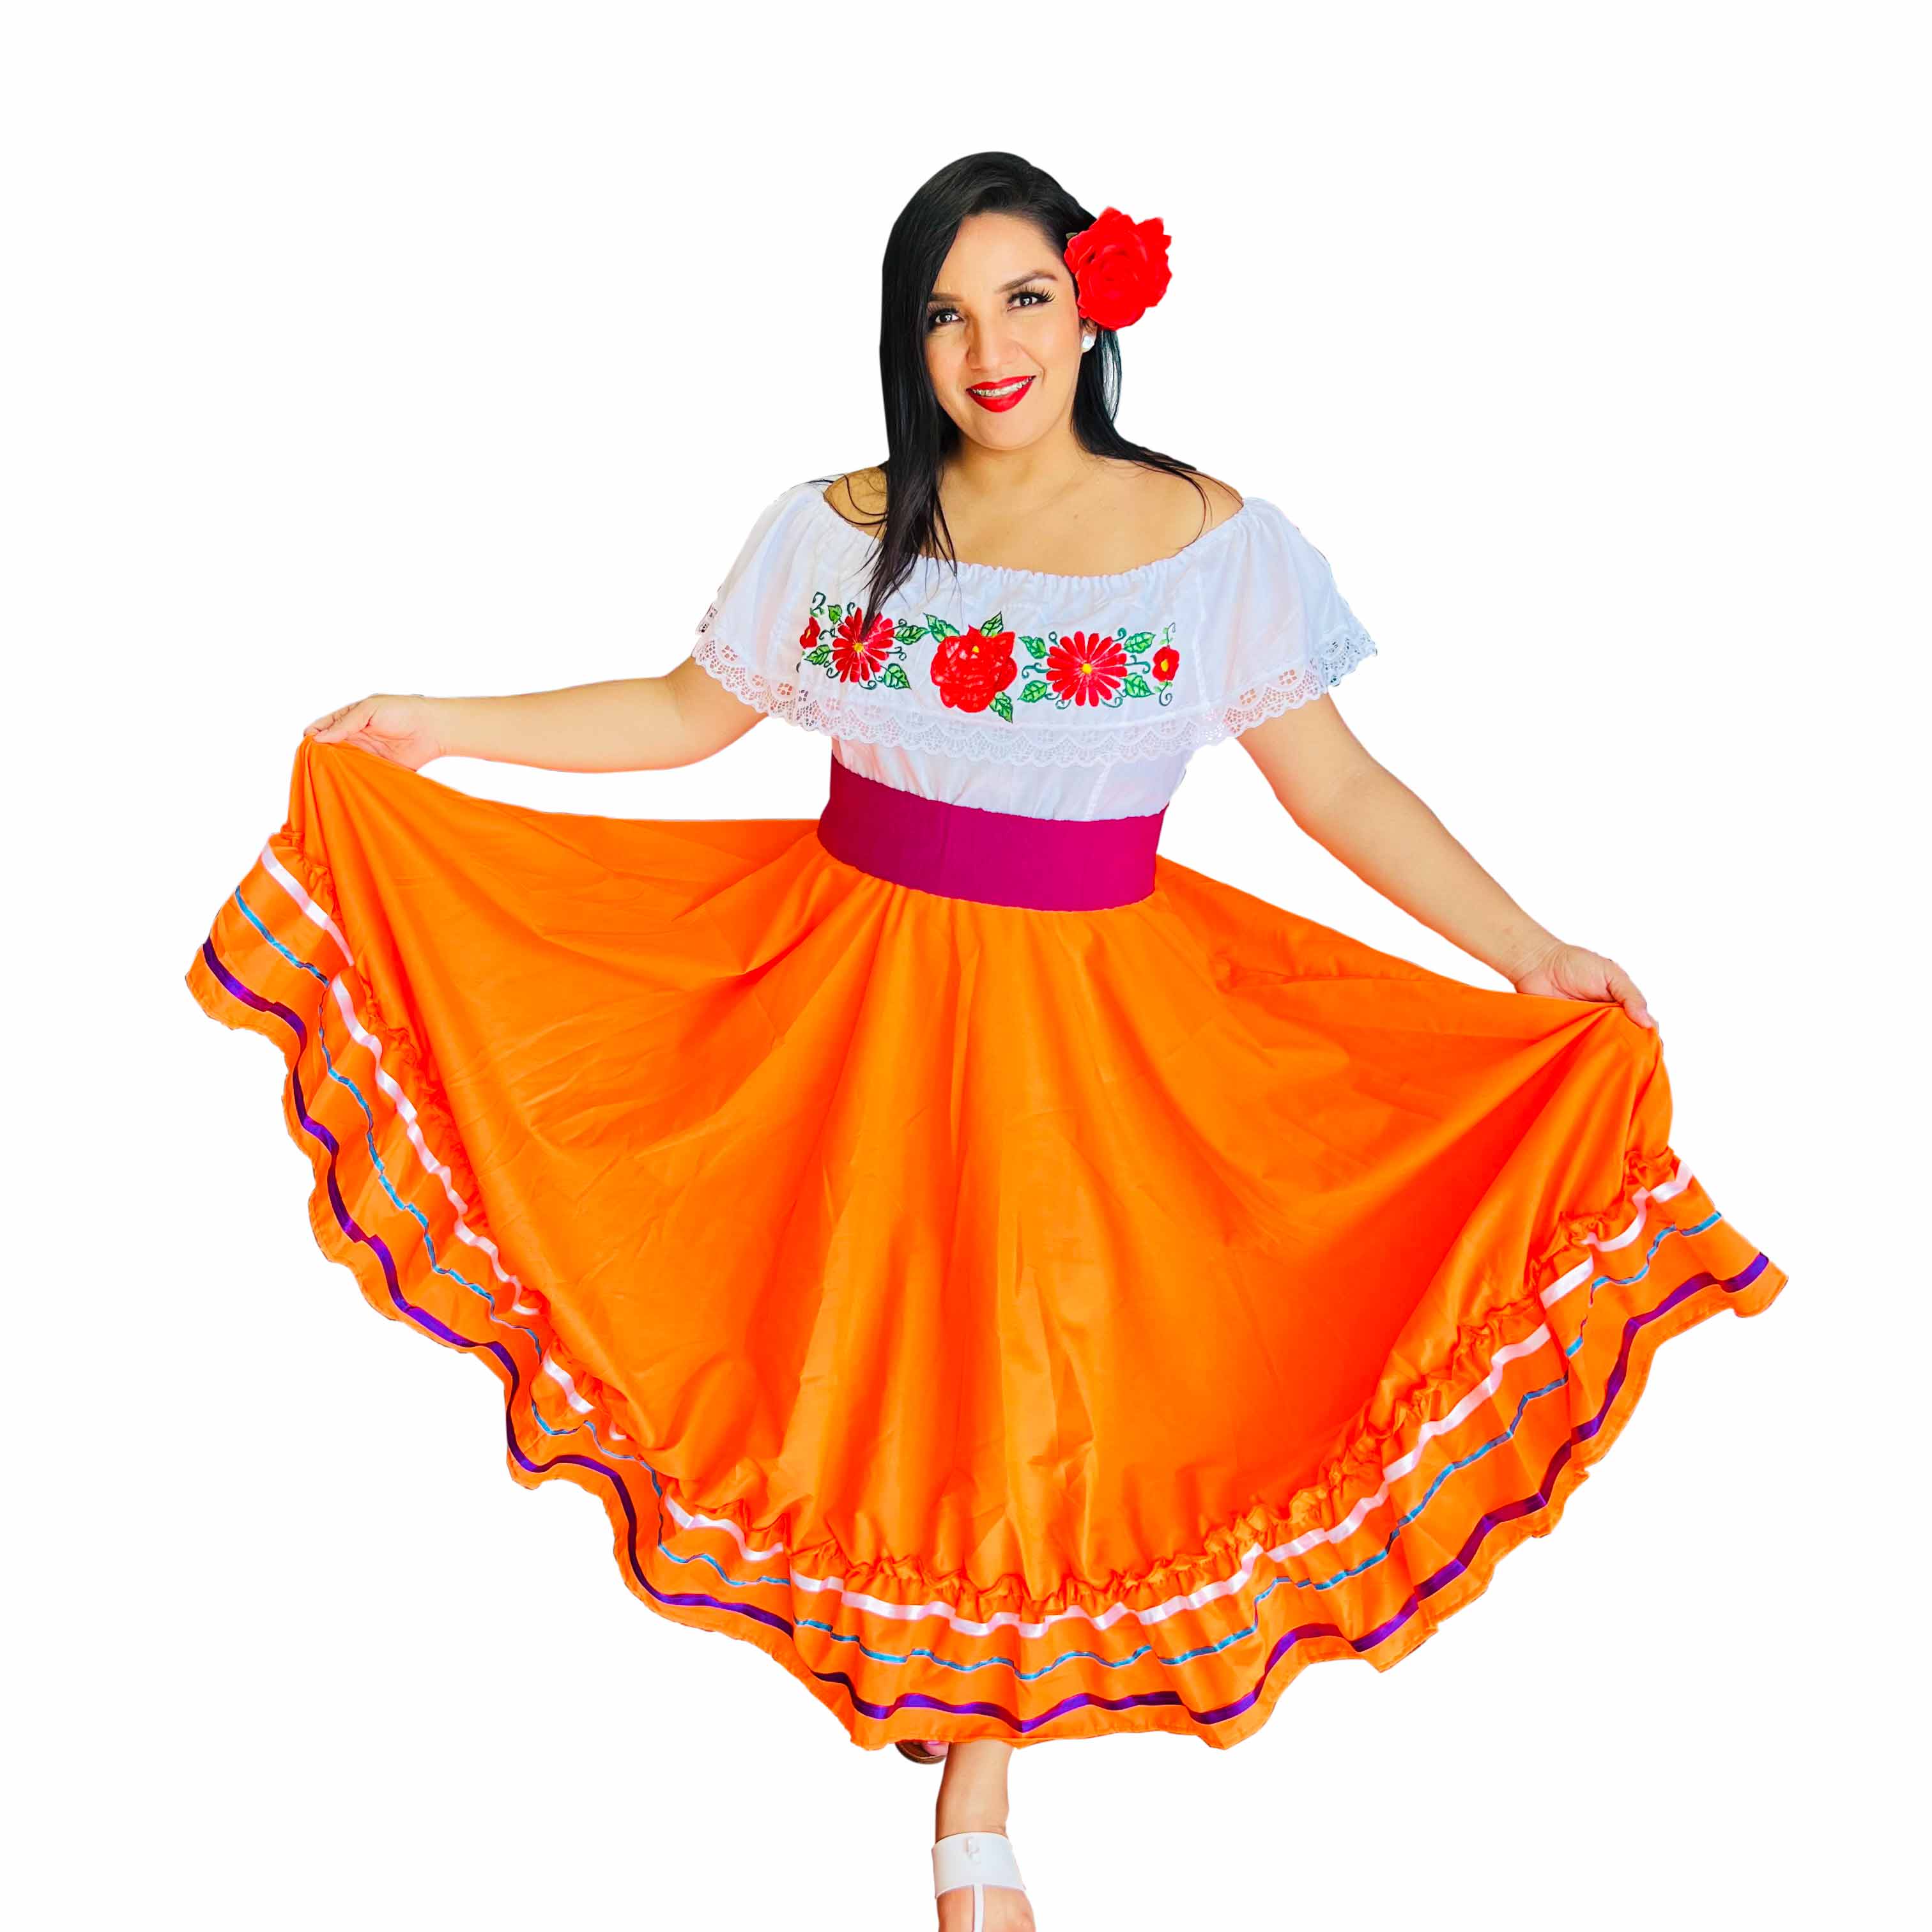 Folkloric 4 Meters Wide Orange Skirt Que Bonito Mexican and Fashion